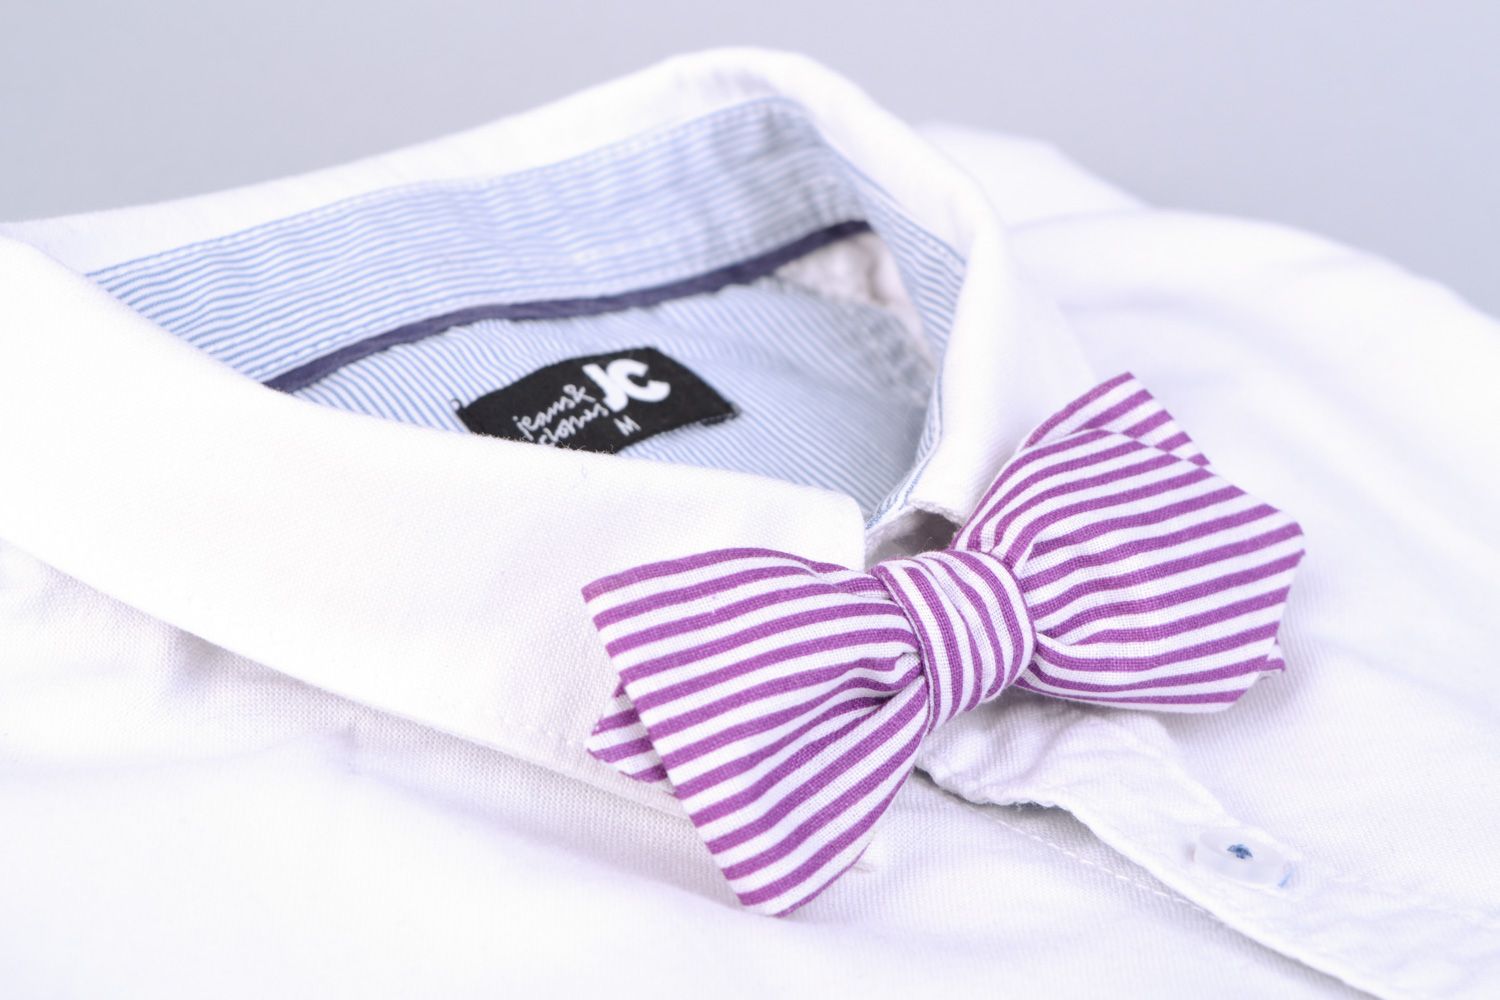 Handmade designer bow tie sewn of striped white and violet cotton fabric for men photo 1